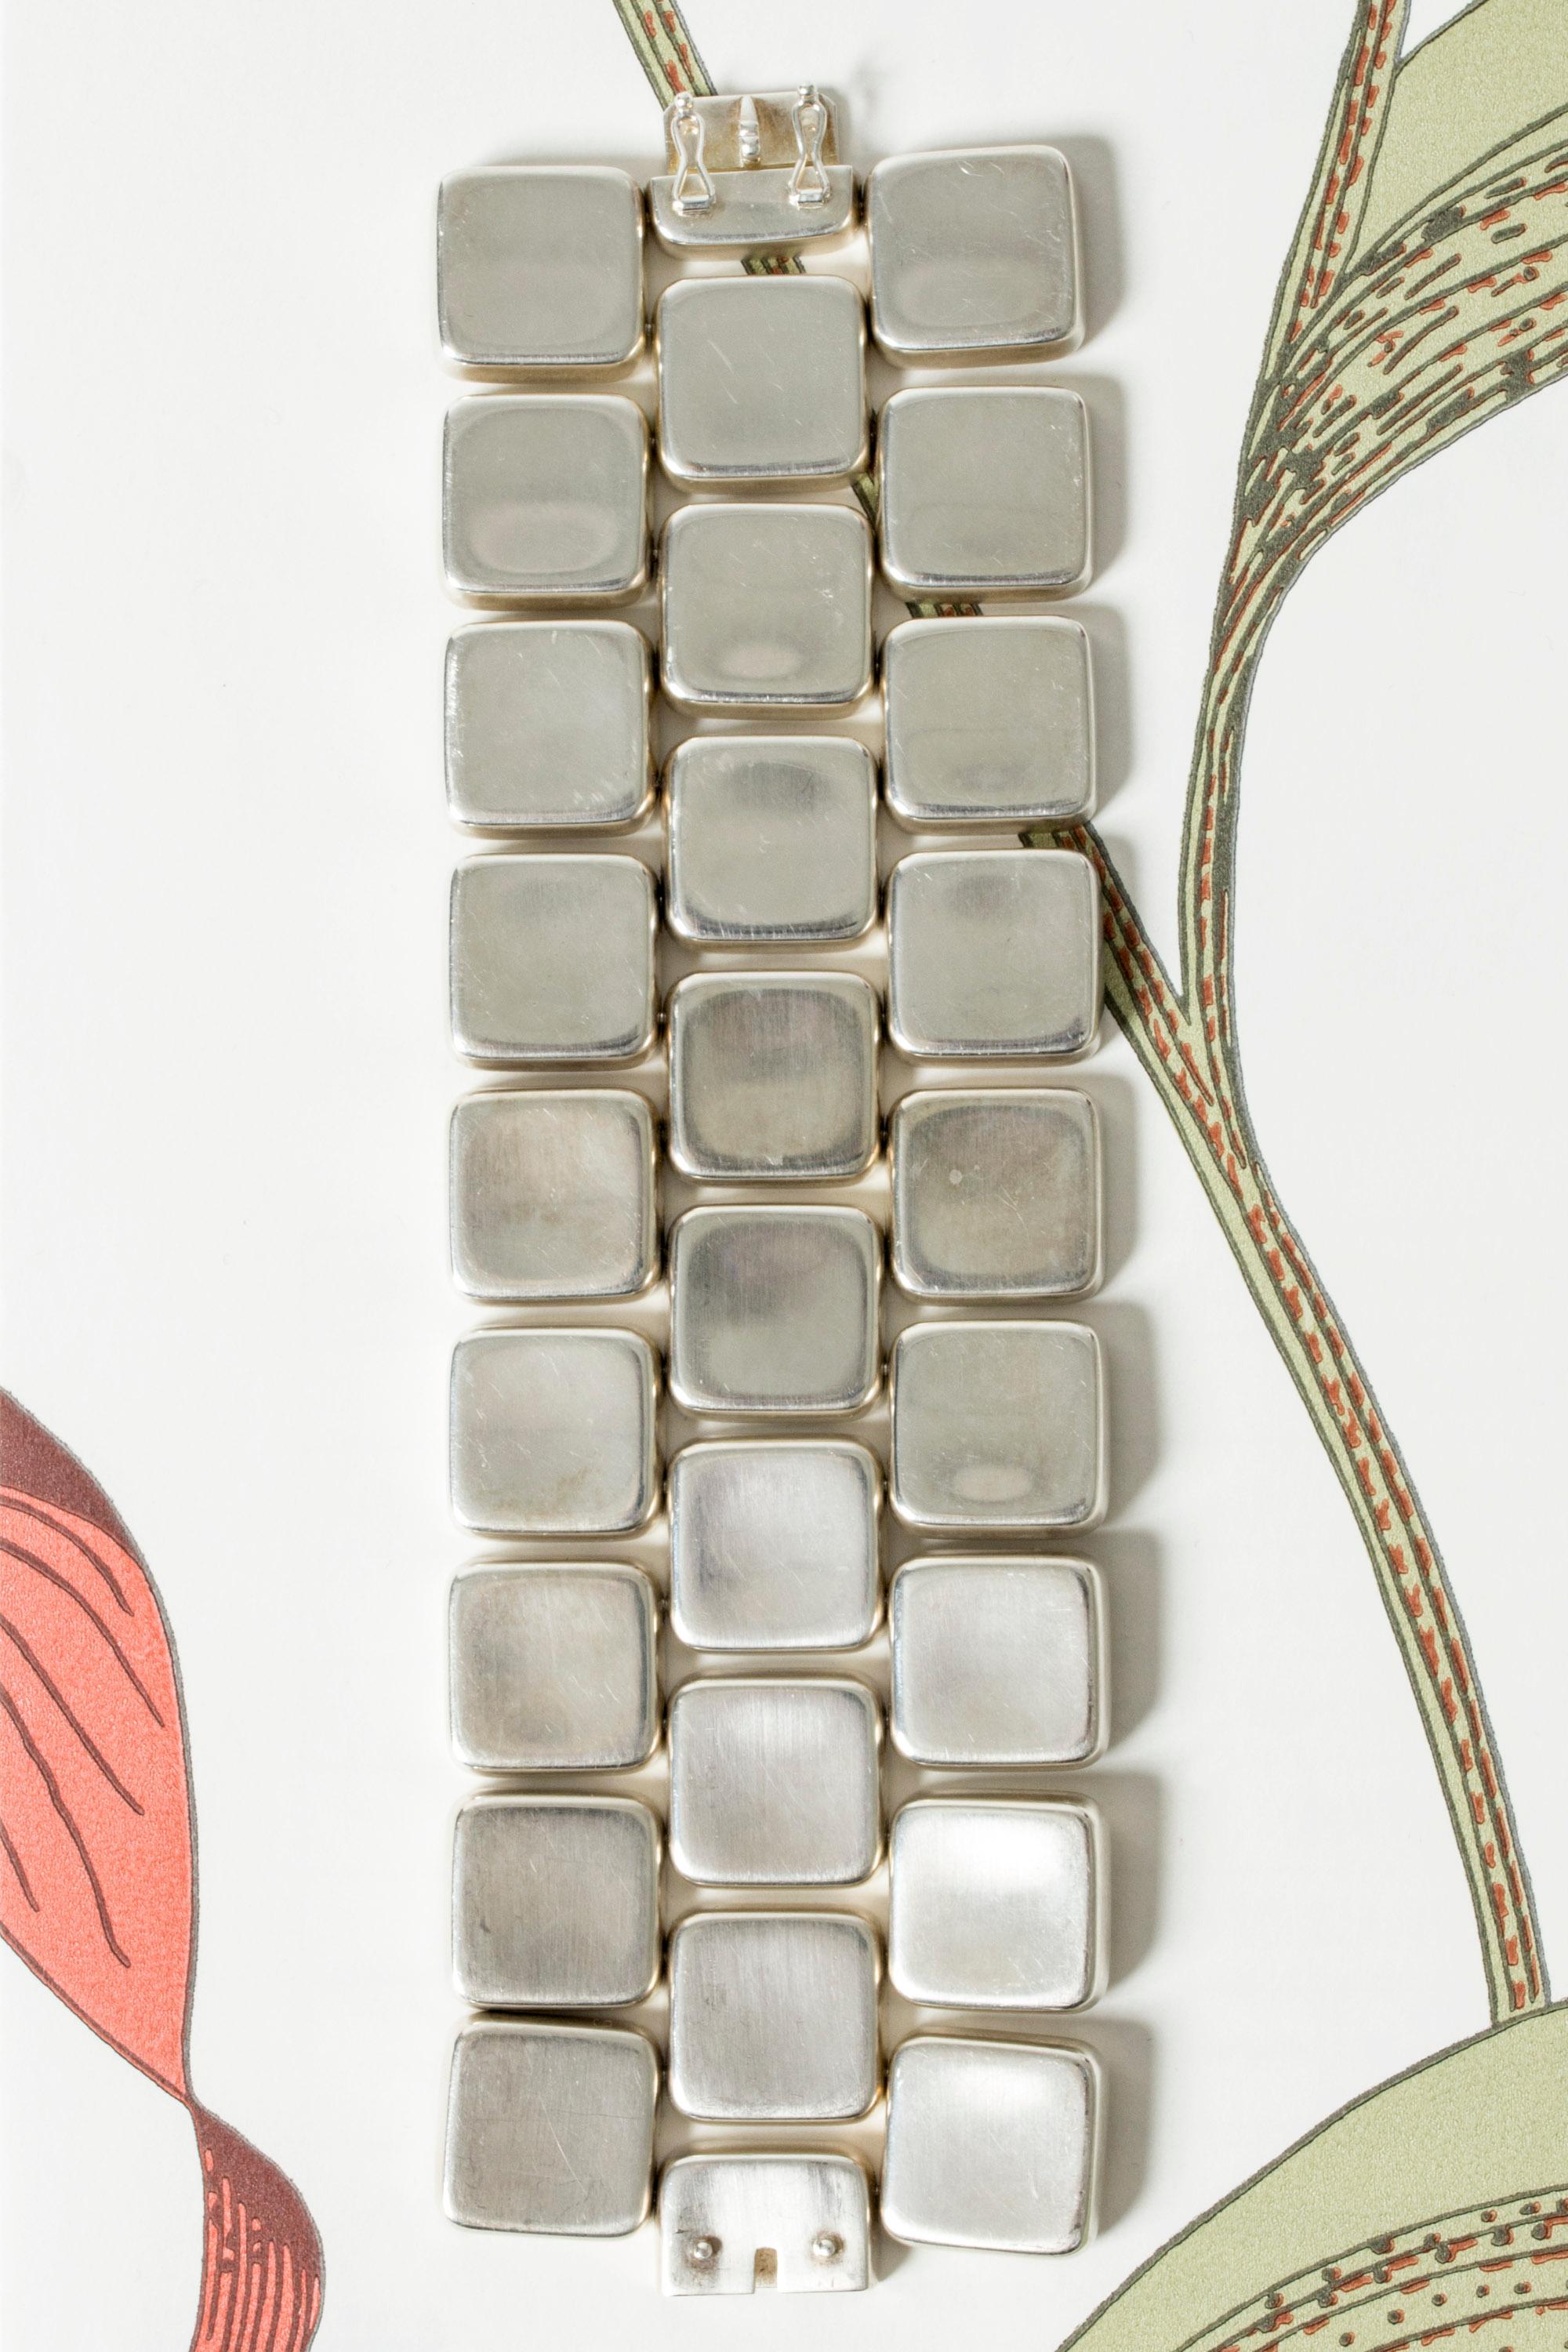 Silver bracelet by Astrid Fog, in a cuff design built up from squares. Massive silver, heavy and striking, a real power look.